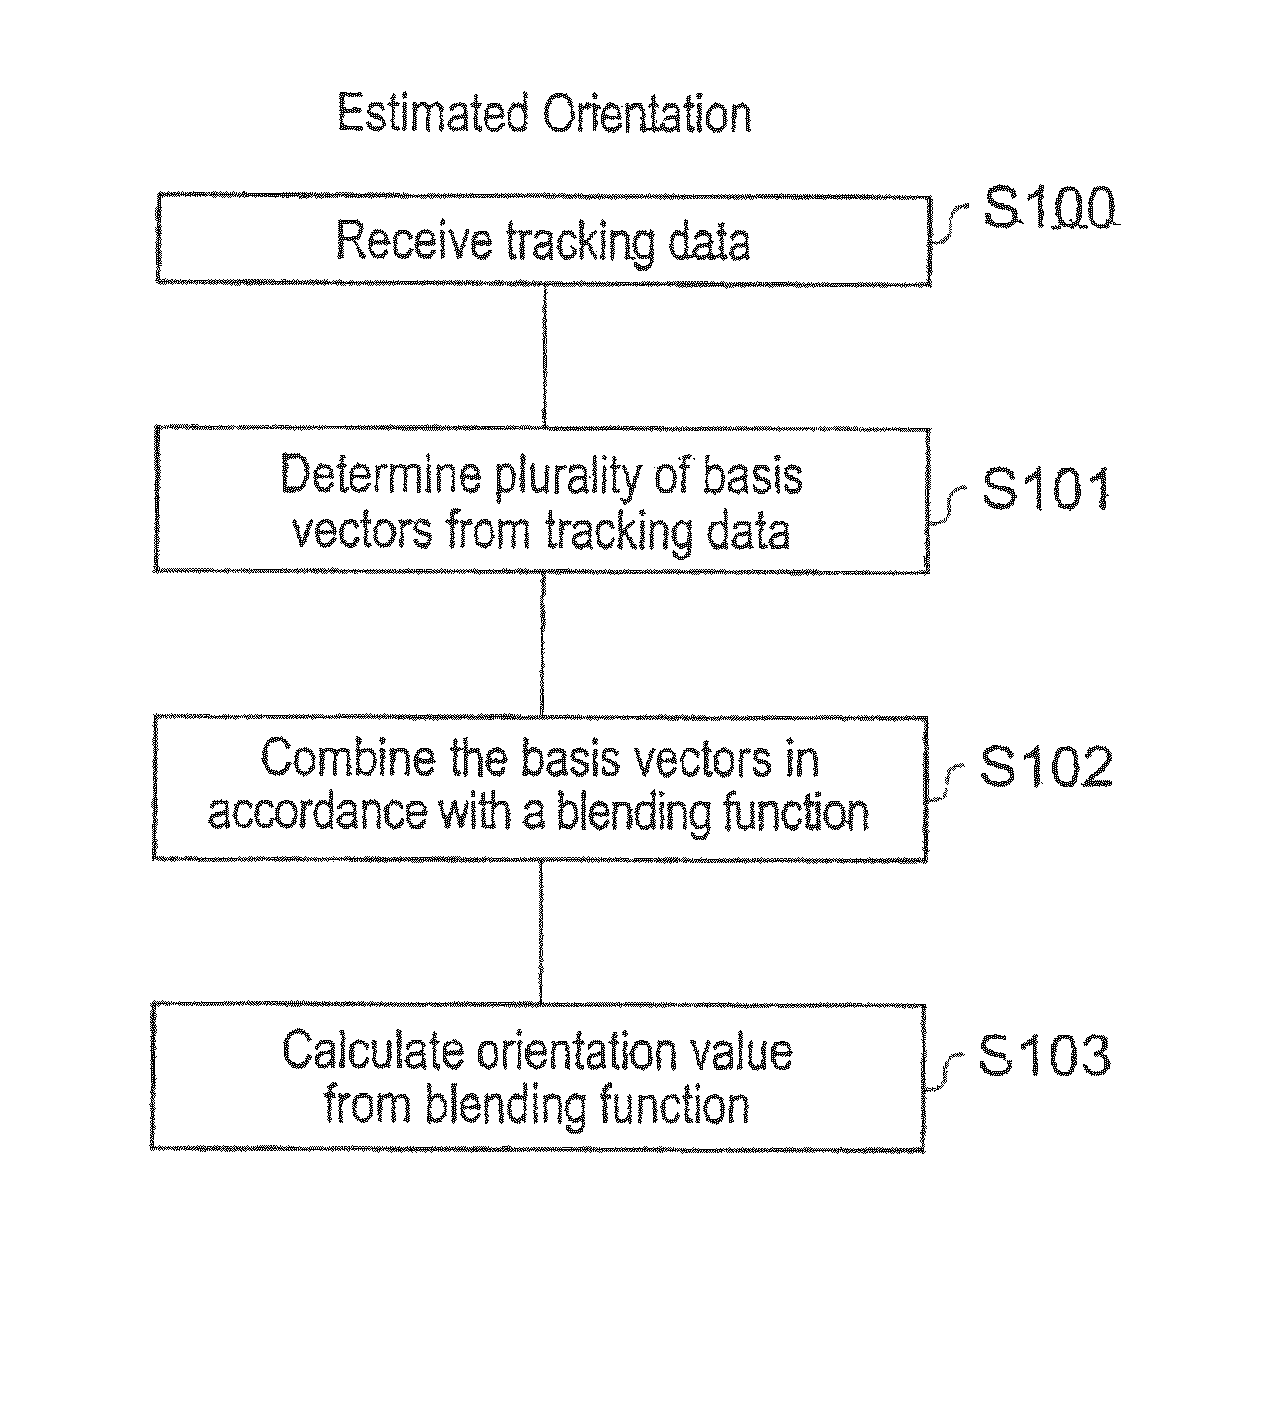 Image processing apparatus and method for estimating orientation